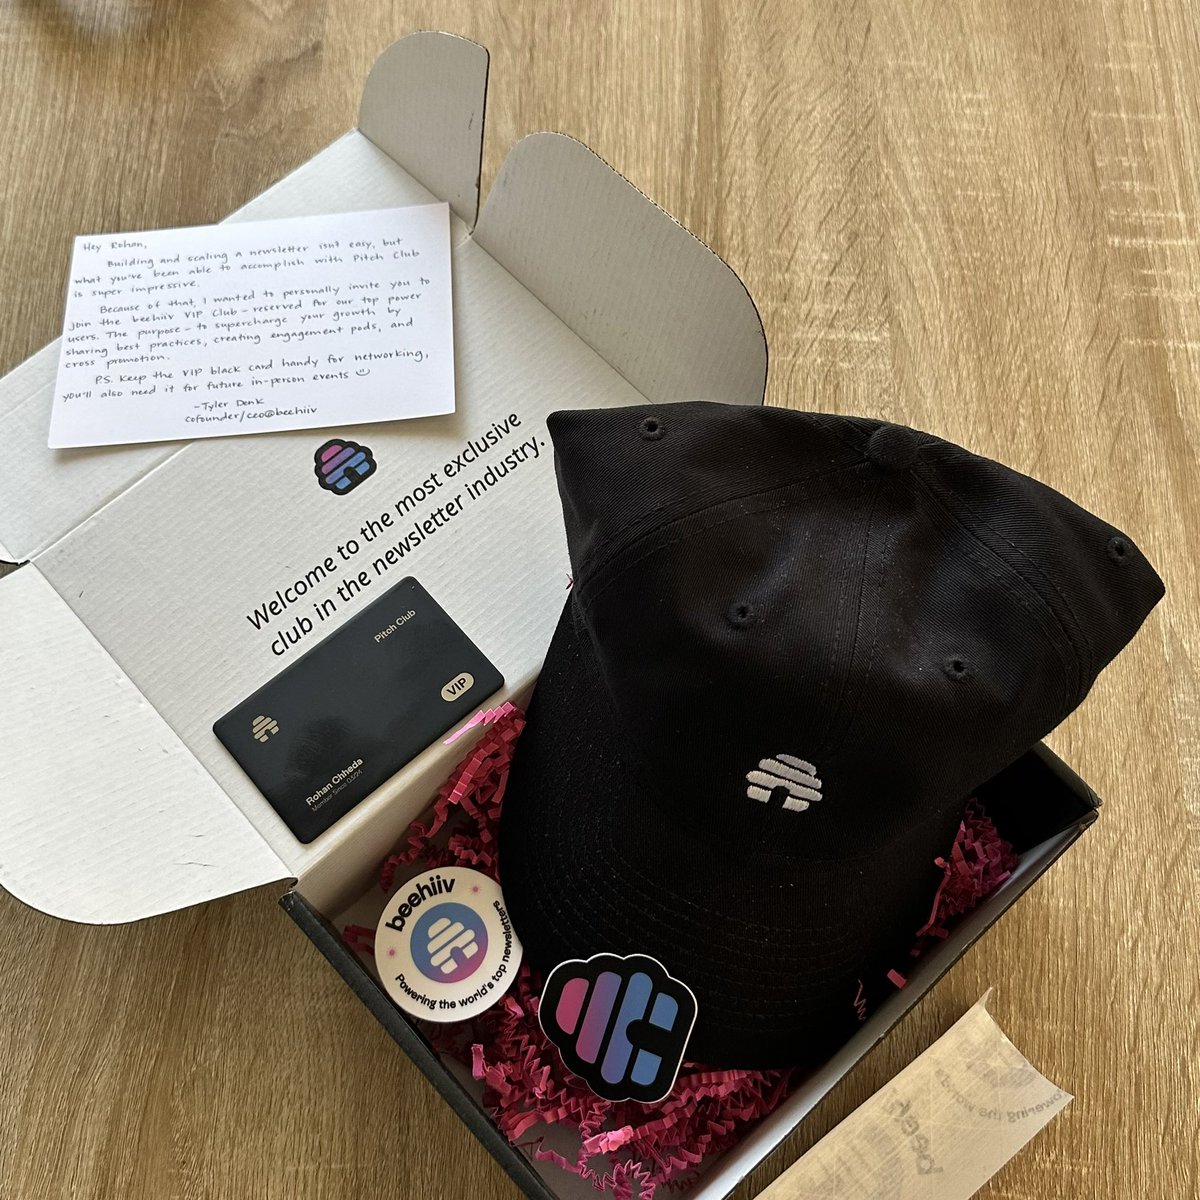 @beehiiv swag game on point! Love the metal card. 

Thanks @denk_tweets for the personal handwritten note. Keeping it real classy! 

Couldn’t have grown @PitchClub_ to a community of 34,000 founders and investors without you’ll!